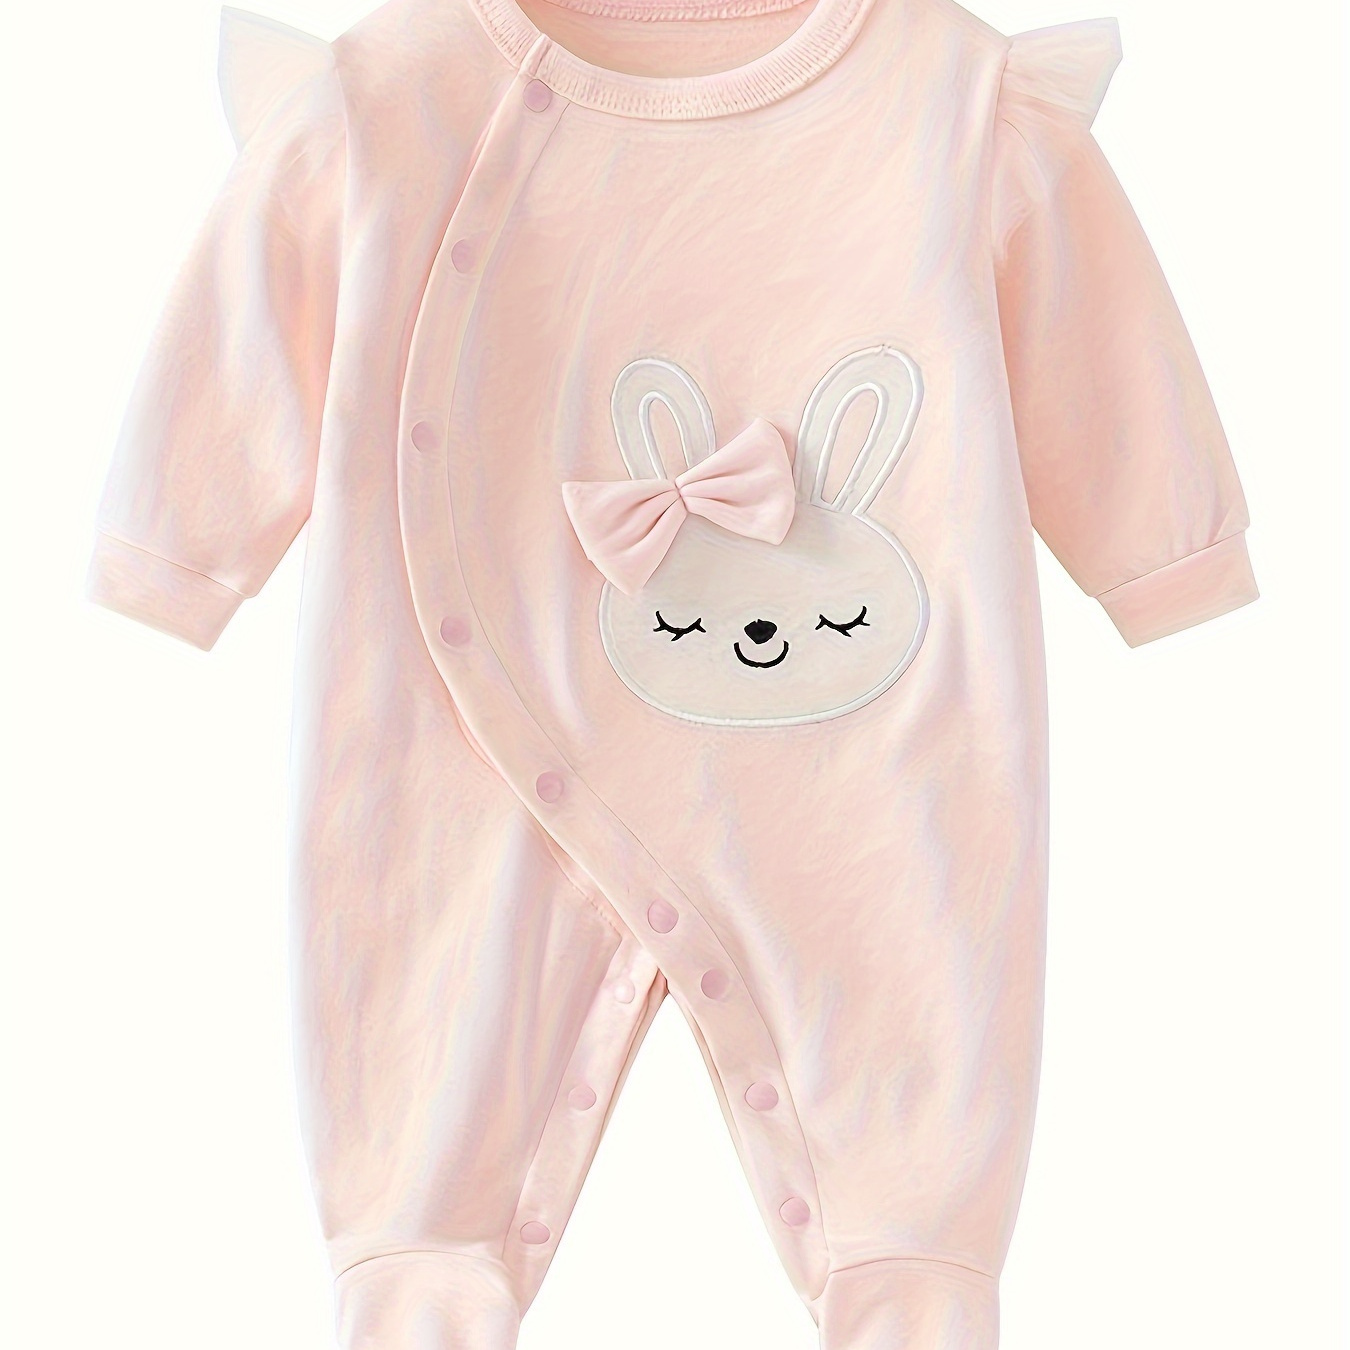 

Newborn Baby Girls Spring And Autumn Cotton Comfy Jumpsuit, Foot Covered Long-sleeved Cute Pink Cartoon Embroidered Rabbit Bodysuit